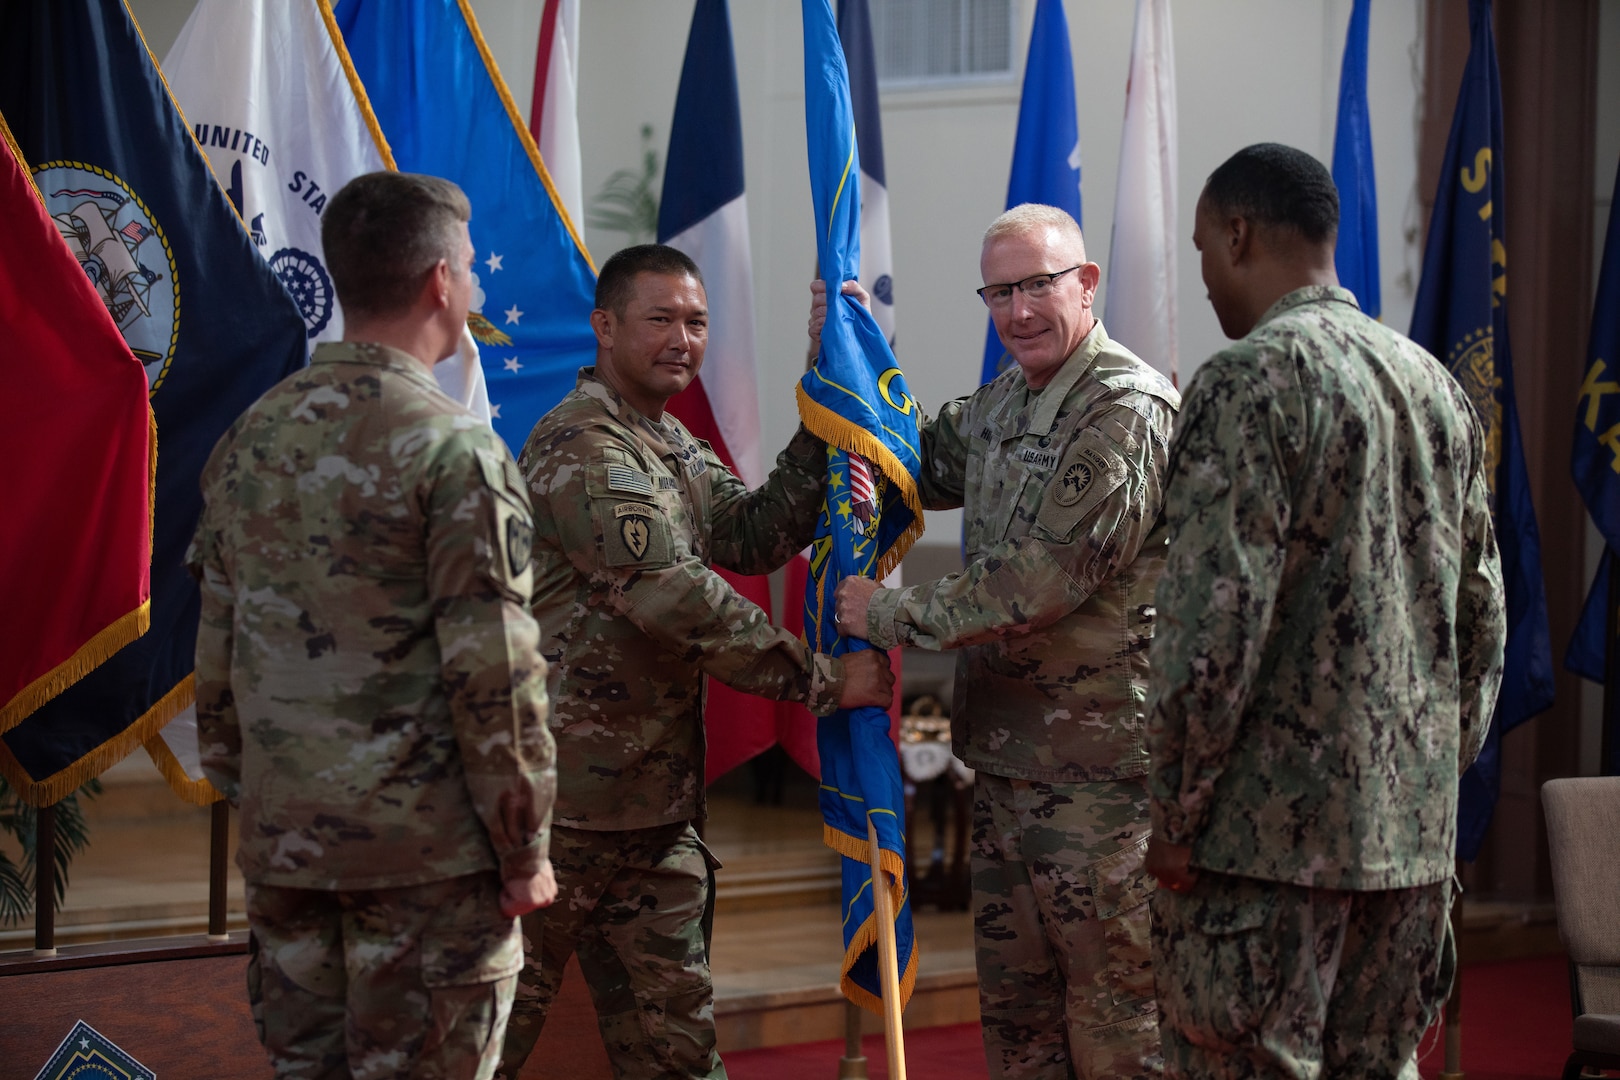 U.S. Army Brig. Gen. Scott Hiipakka relinquished command of Joint Task Force Guantanamo (JTF-GTMO) to U.S. Army Col. Matthew Jemmott, during a ceremony on June 20, 2023, at Naval Station Guantanamo Bay.